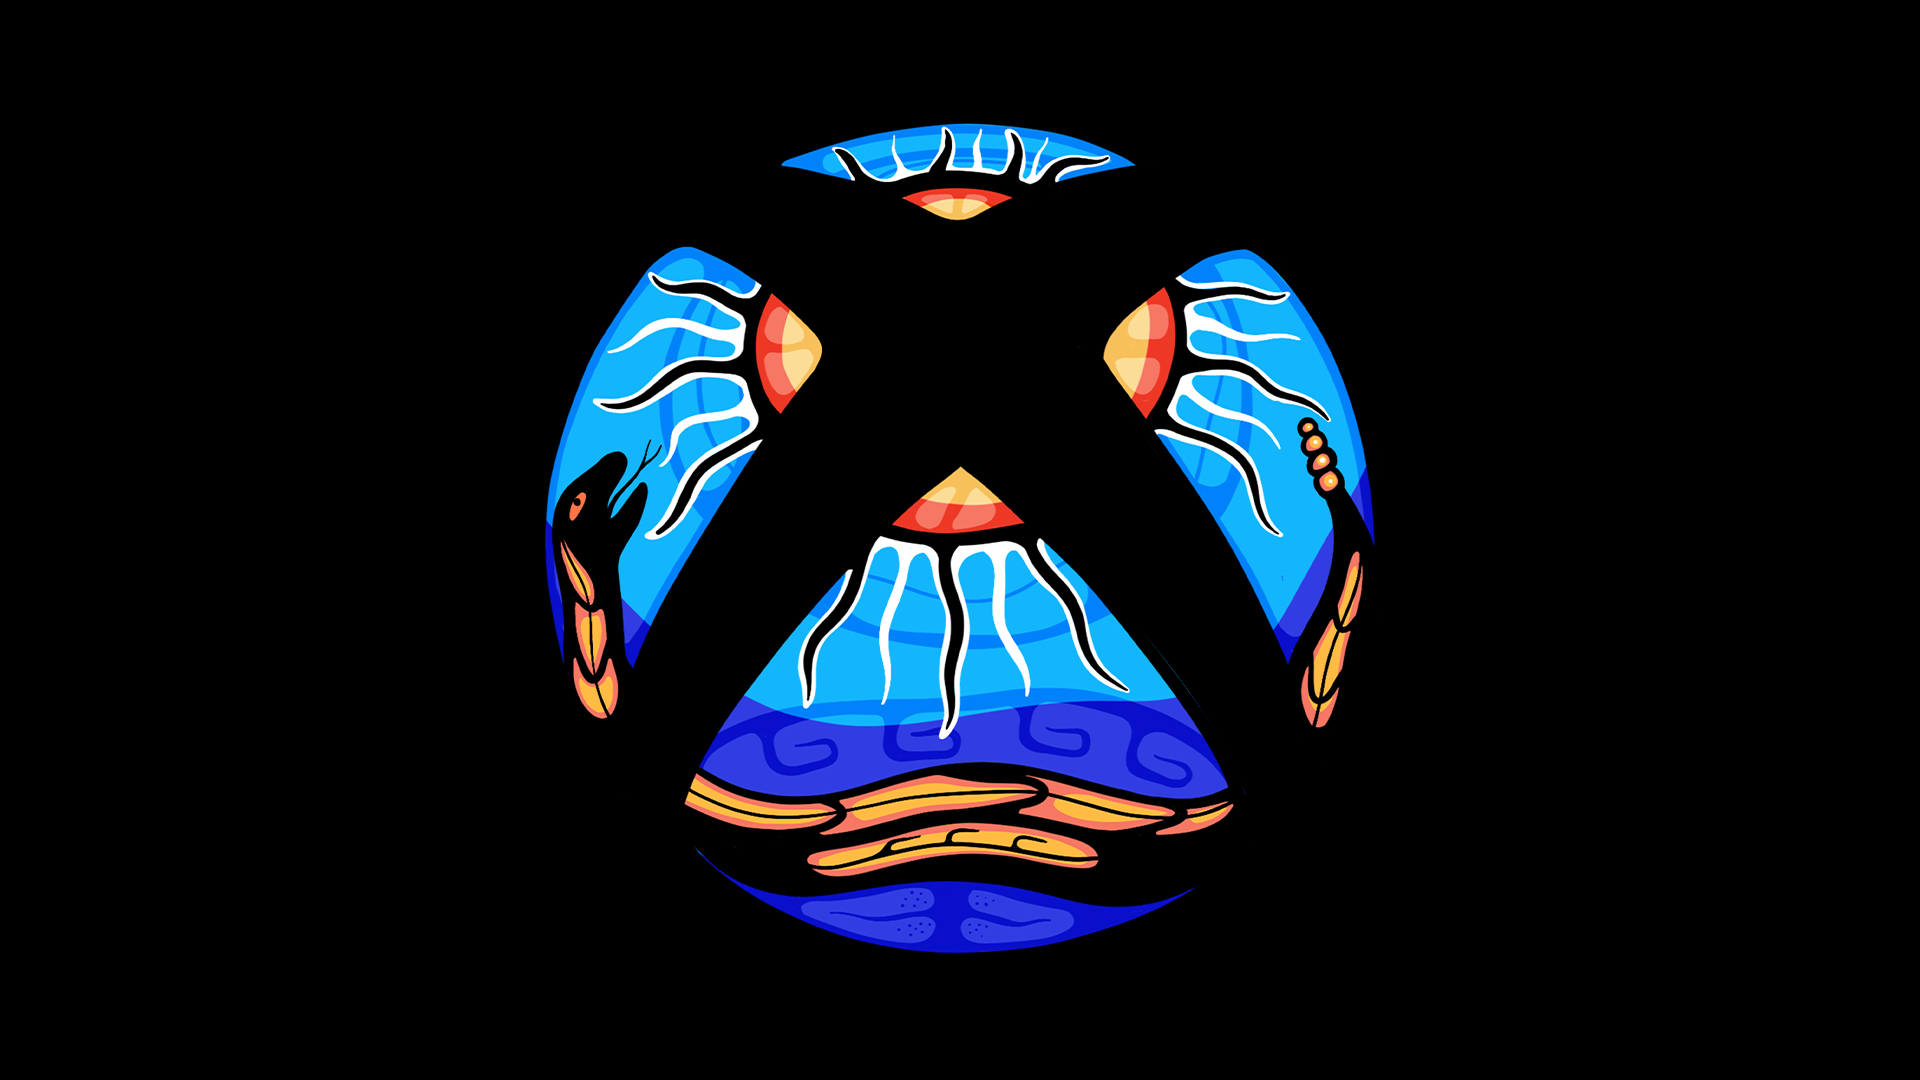 Stylized Xbox logo featuring a snake and sun in the traditional Anishinaabe Style